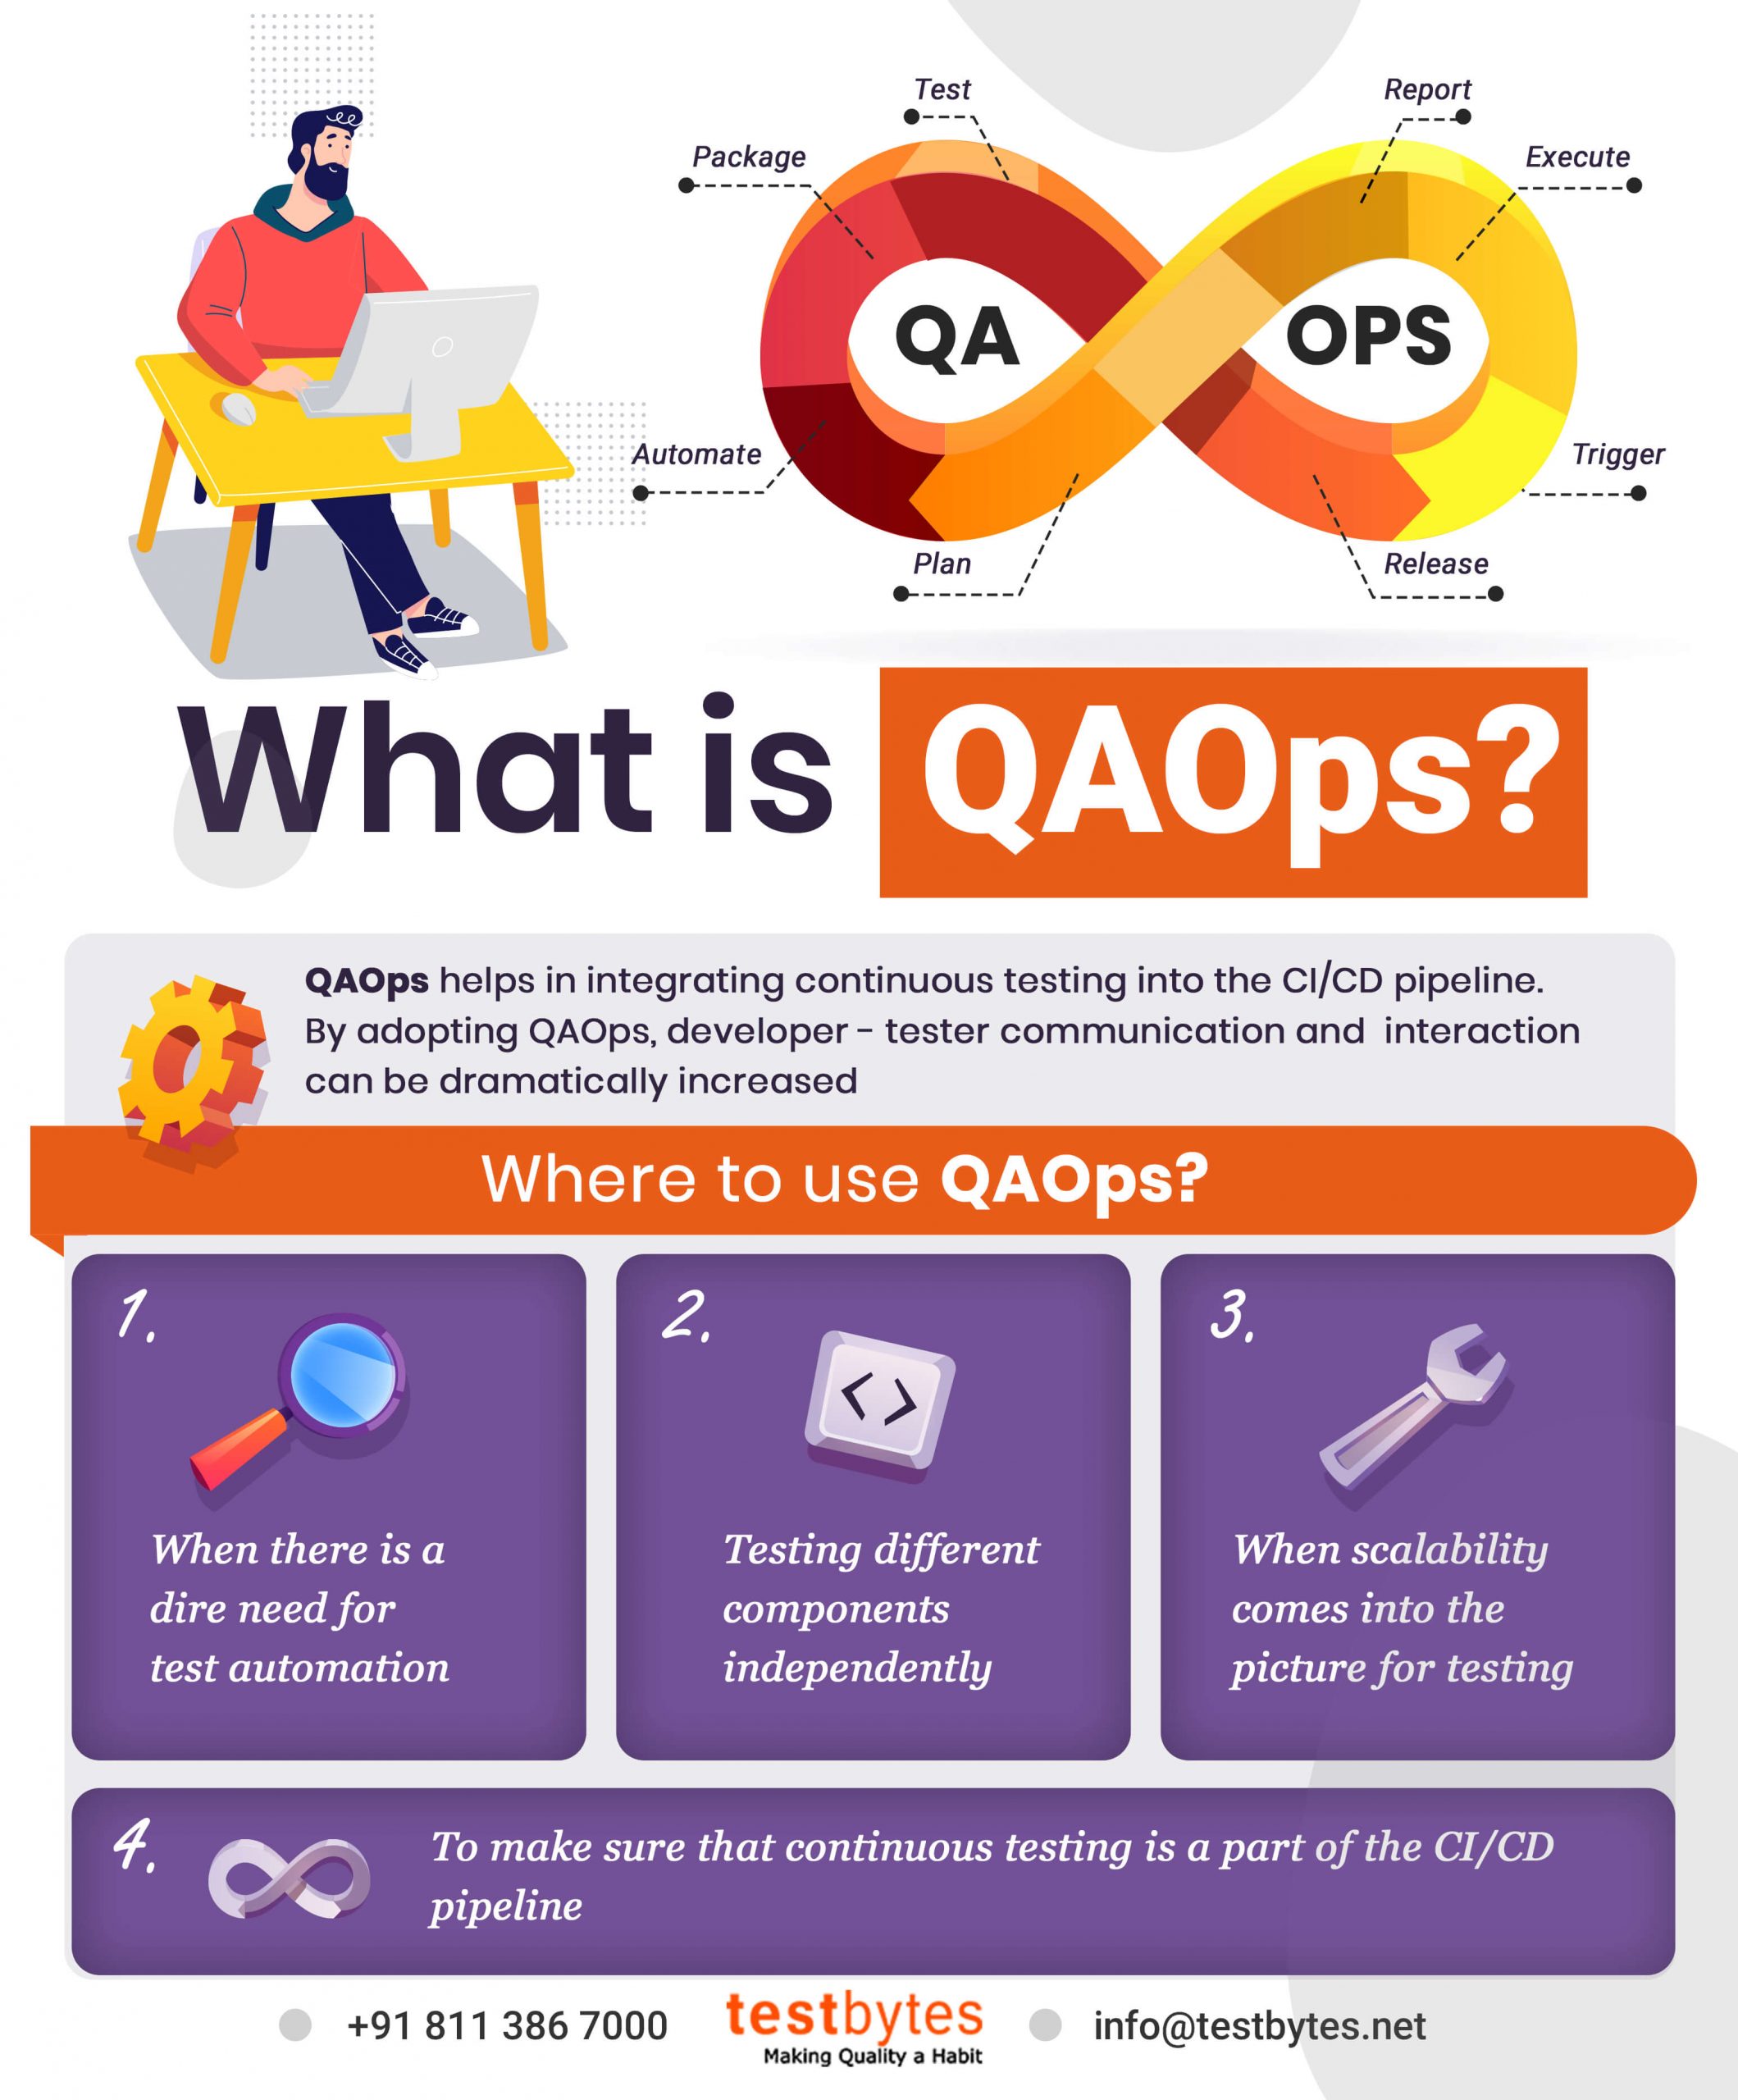 What are the Advantages of QA Ops